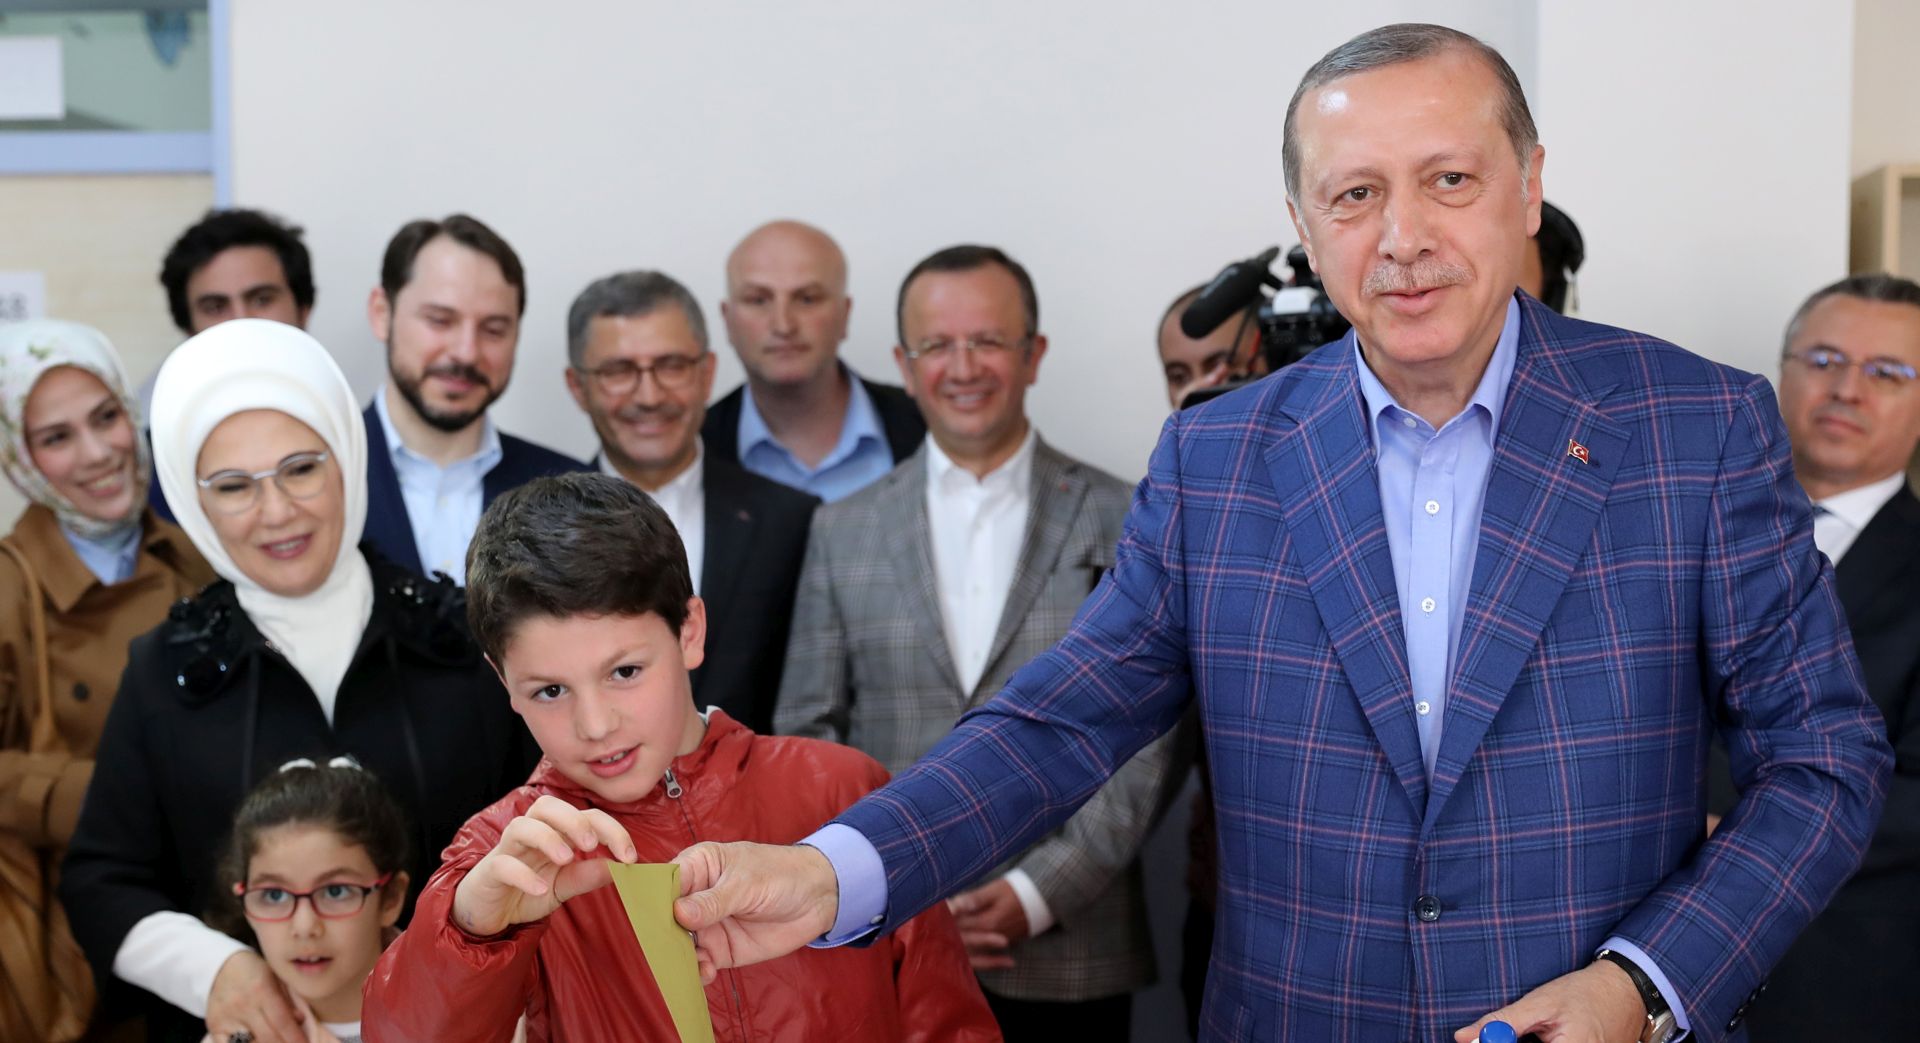 epa05910546 Turkish President Recep Tayyip Erdogan (R) cast his vote with his grandson Mehmet Akif (L) as his wife Emine (L-back) and granddaughter Mahinur acompany him at a polling station for a referendum on the constitutional reform in Istanbul, Turkey, 16 April 2017. The proposed reform, passed by Turkish parliament on 21 January, would change the country's parliamentarian system of governance into a presidential one, which the opposition denounced as giving more power to Turkish president Recep Tayyip Erdogan.  EPA/TOLGA BOZOGLU